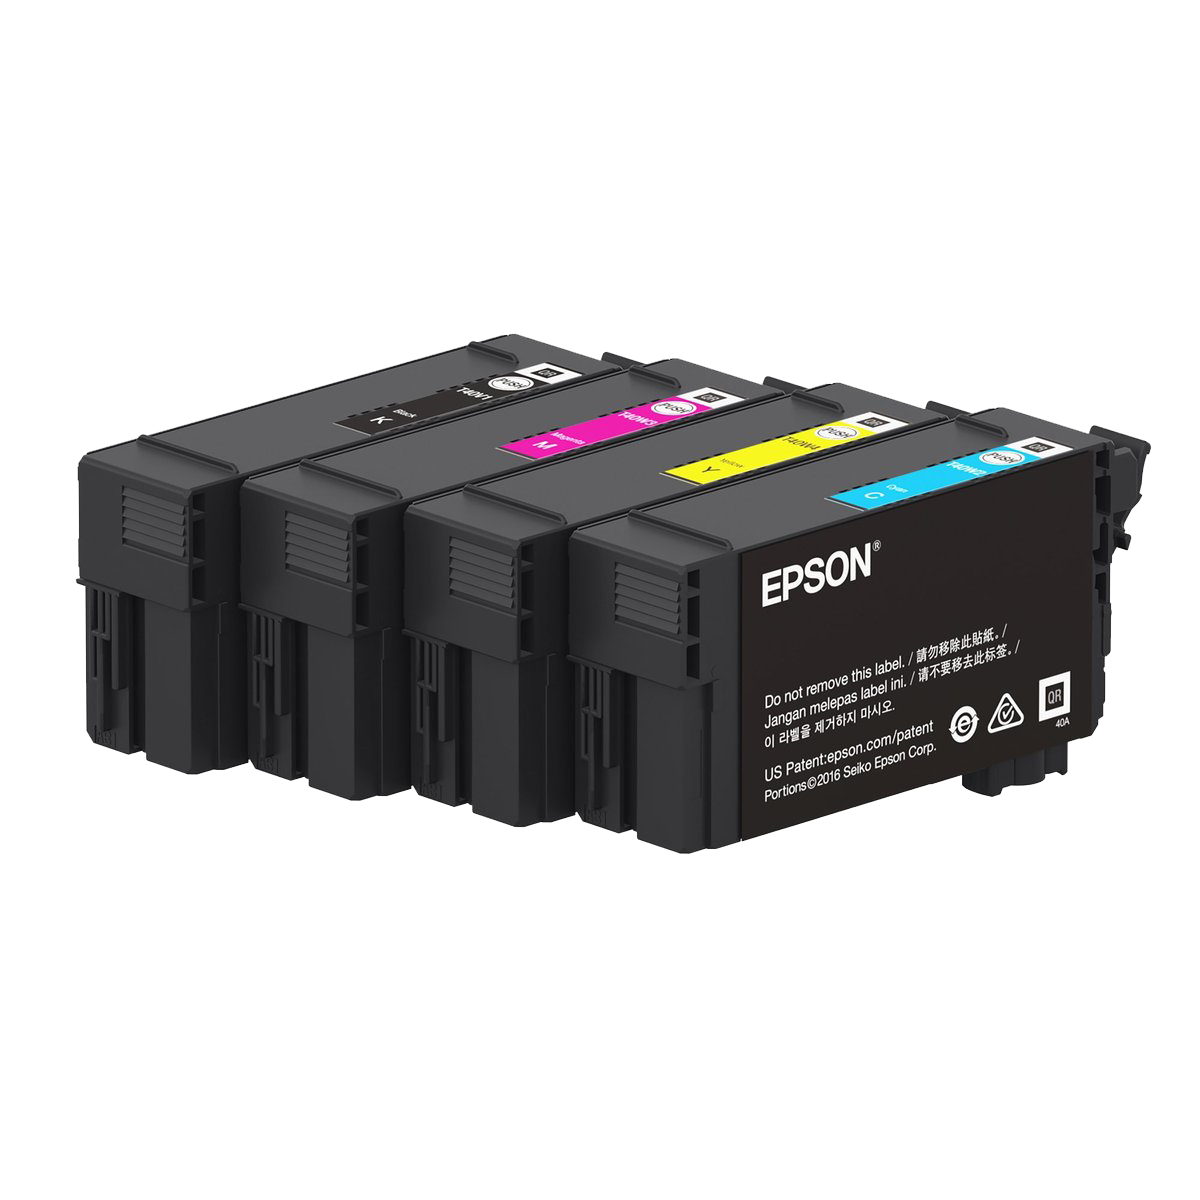 Epson T40W UltraChrome XD2 High Capacity Inks for SureColor T3170, T5170, Color: Cyan(50ml)